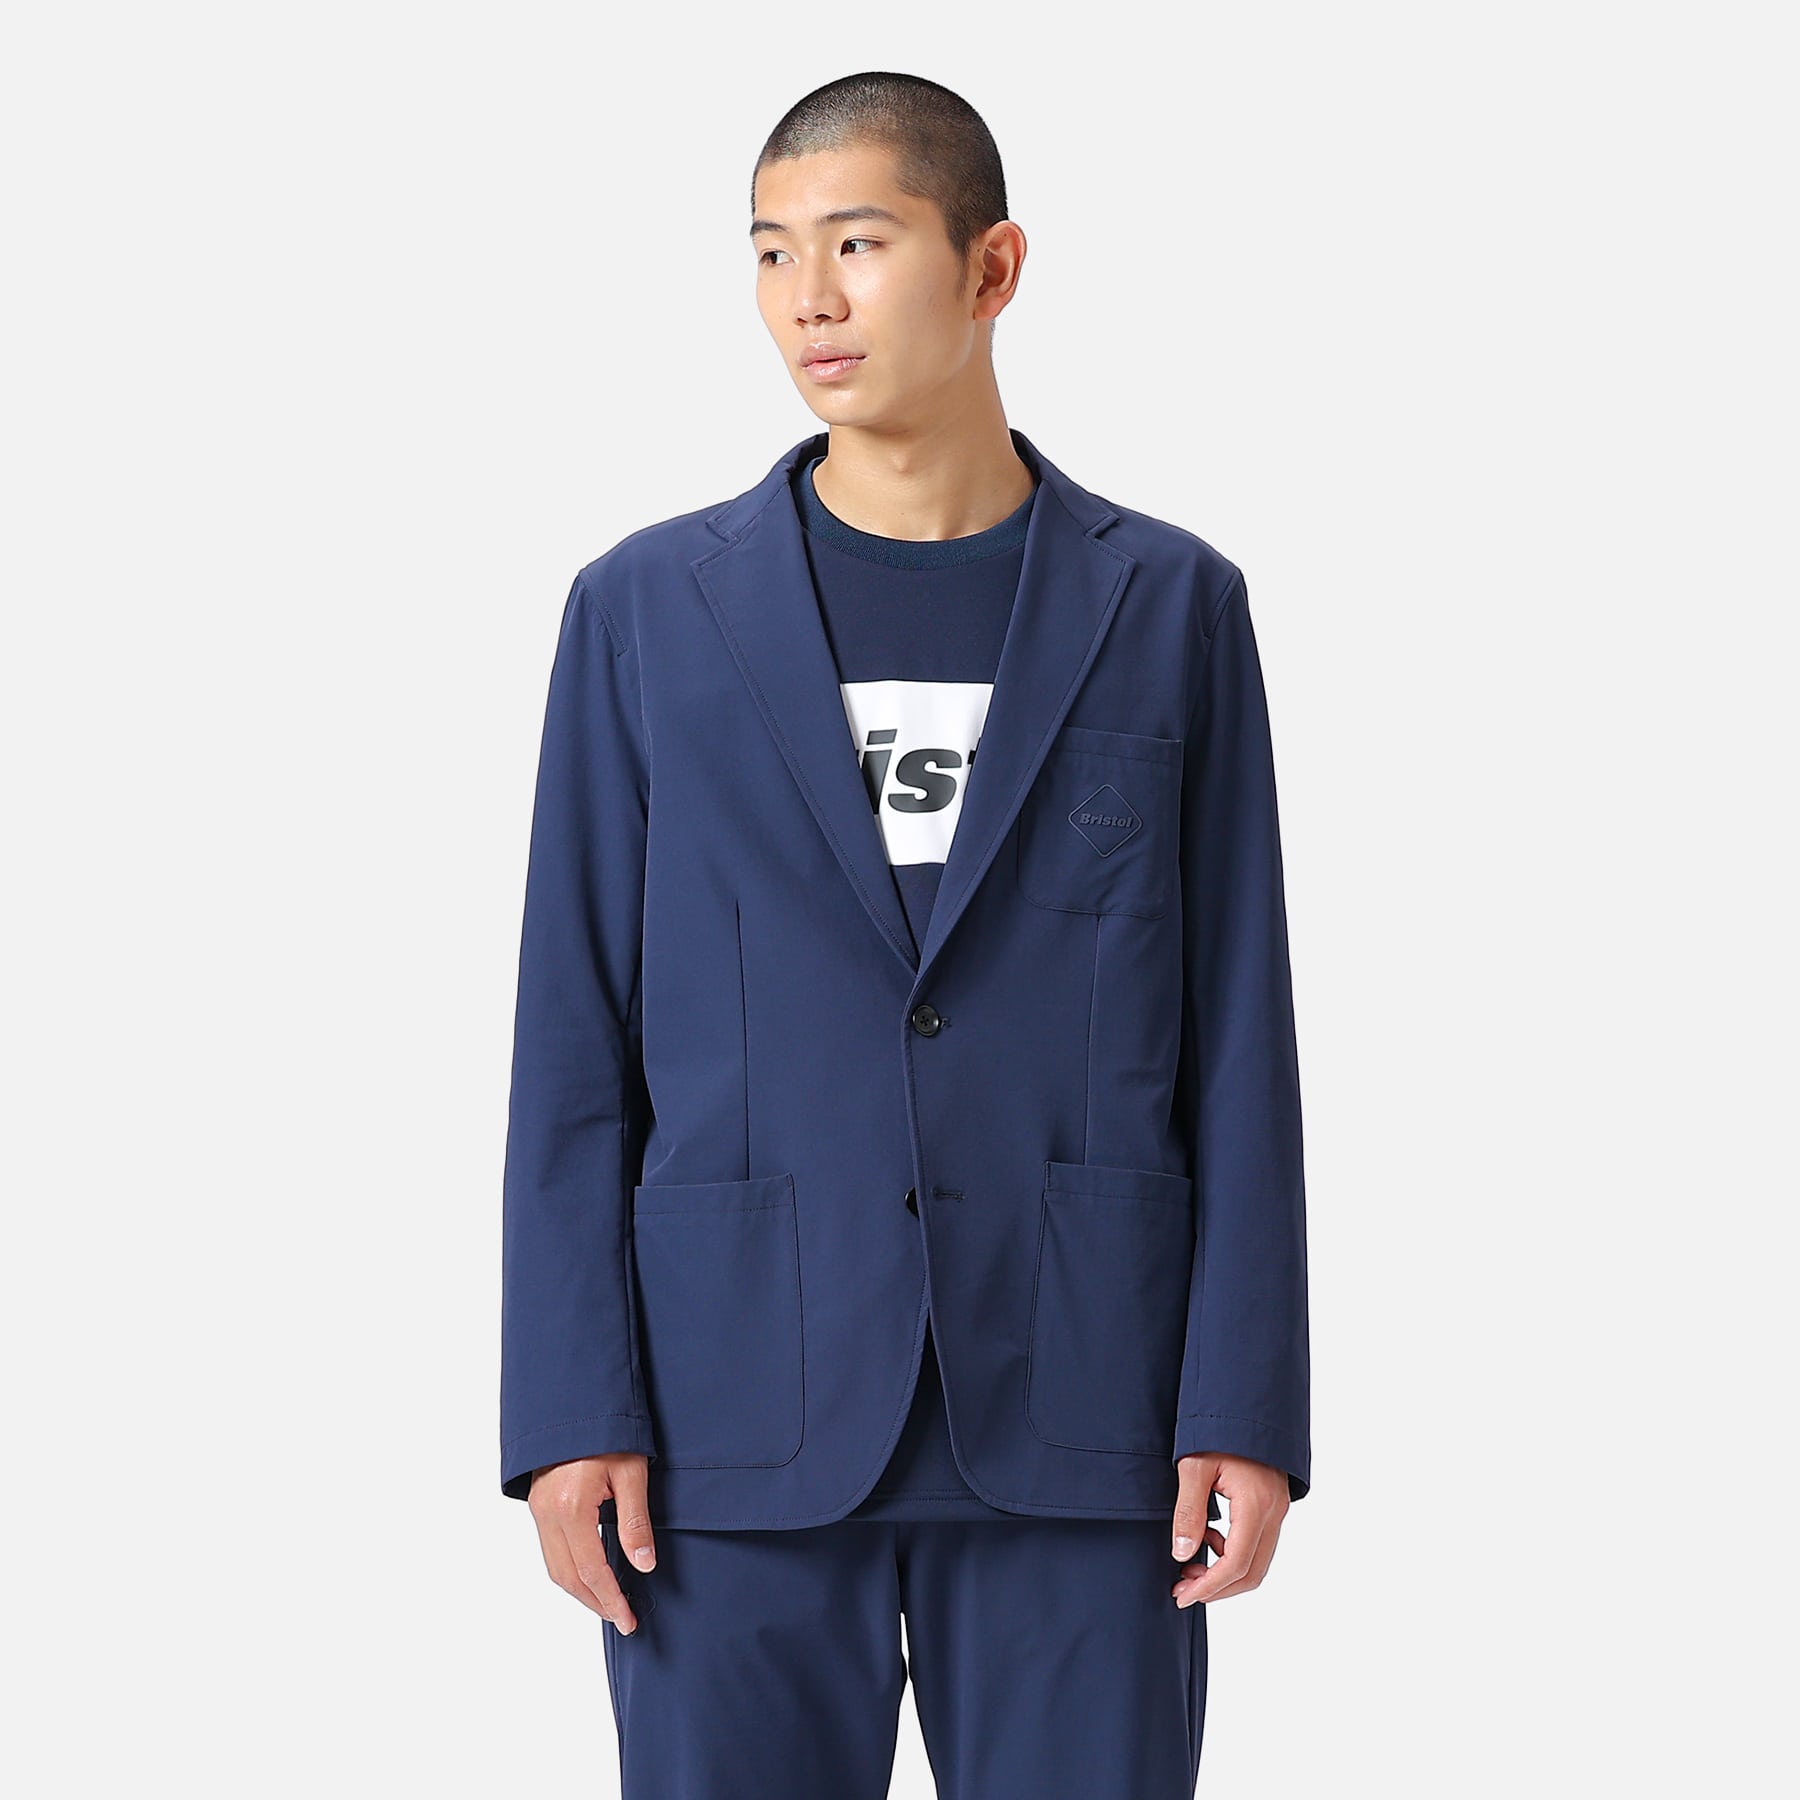 S FCRB 22AW TOUR PACKABLE TEAM BLAZER 通販 サイト メンズ